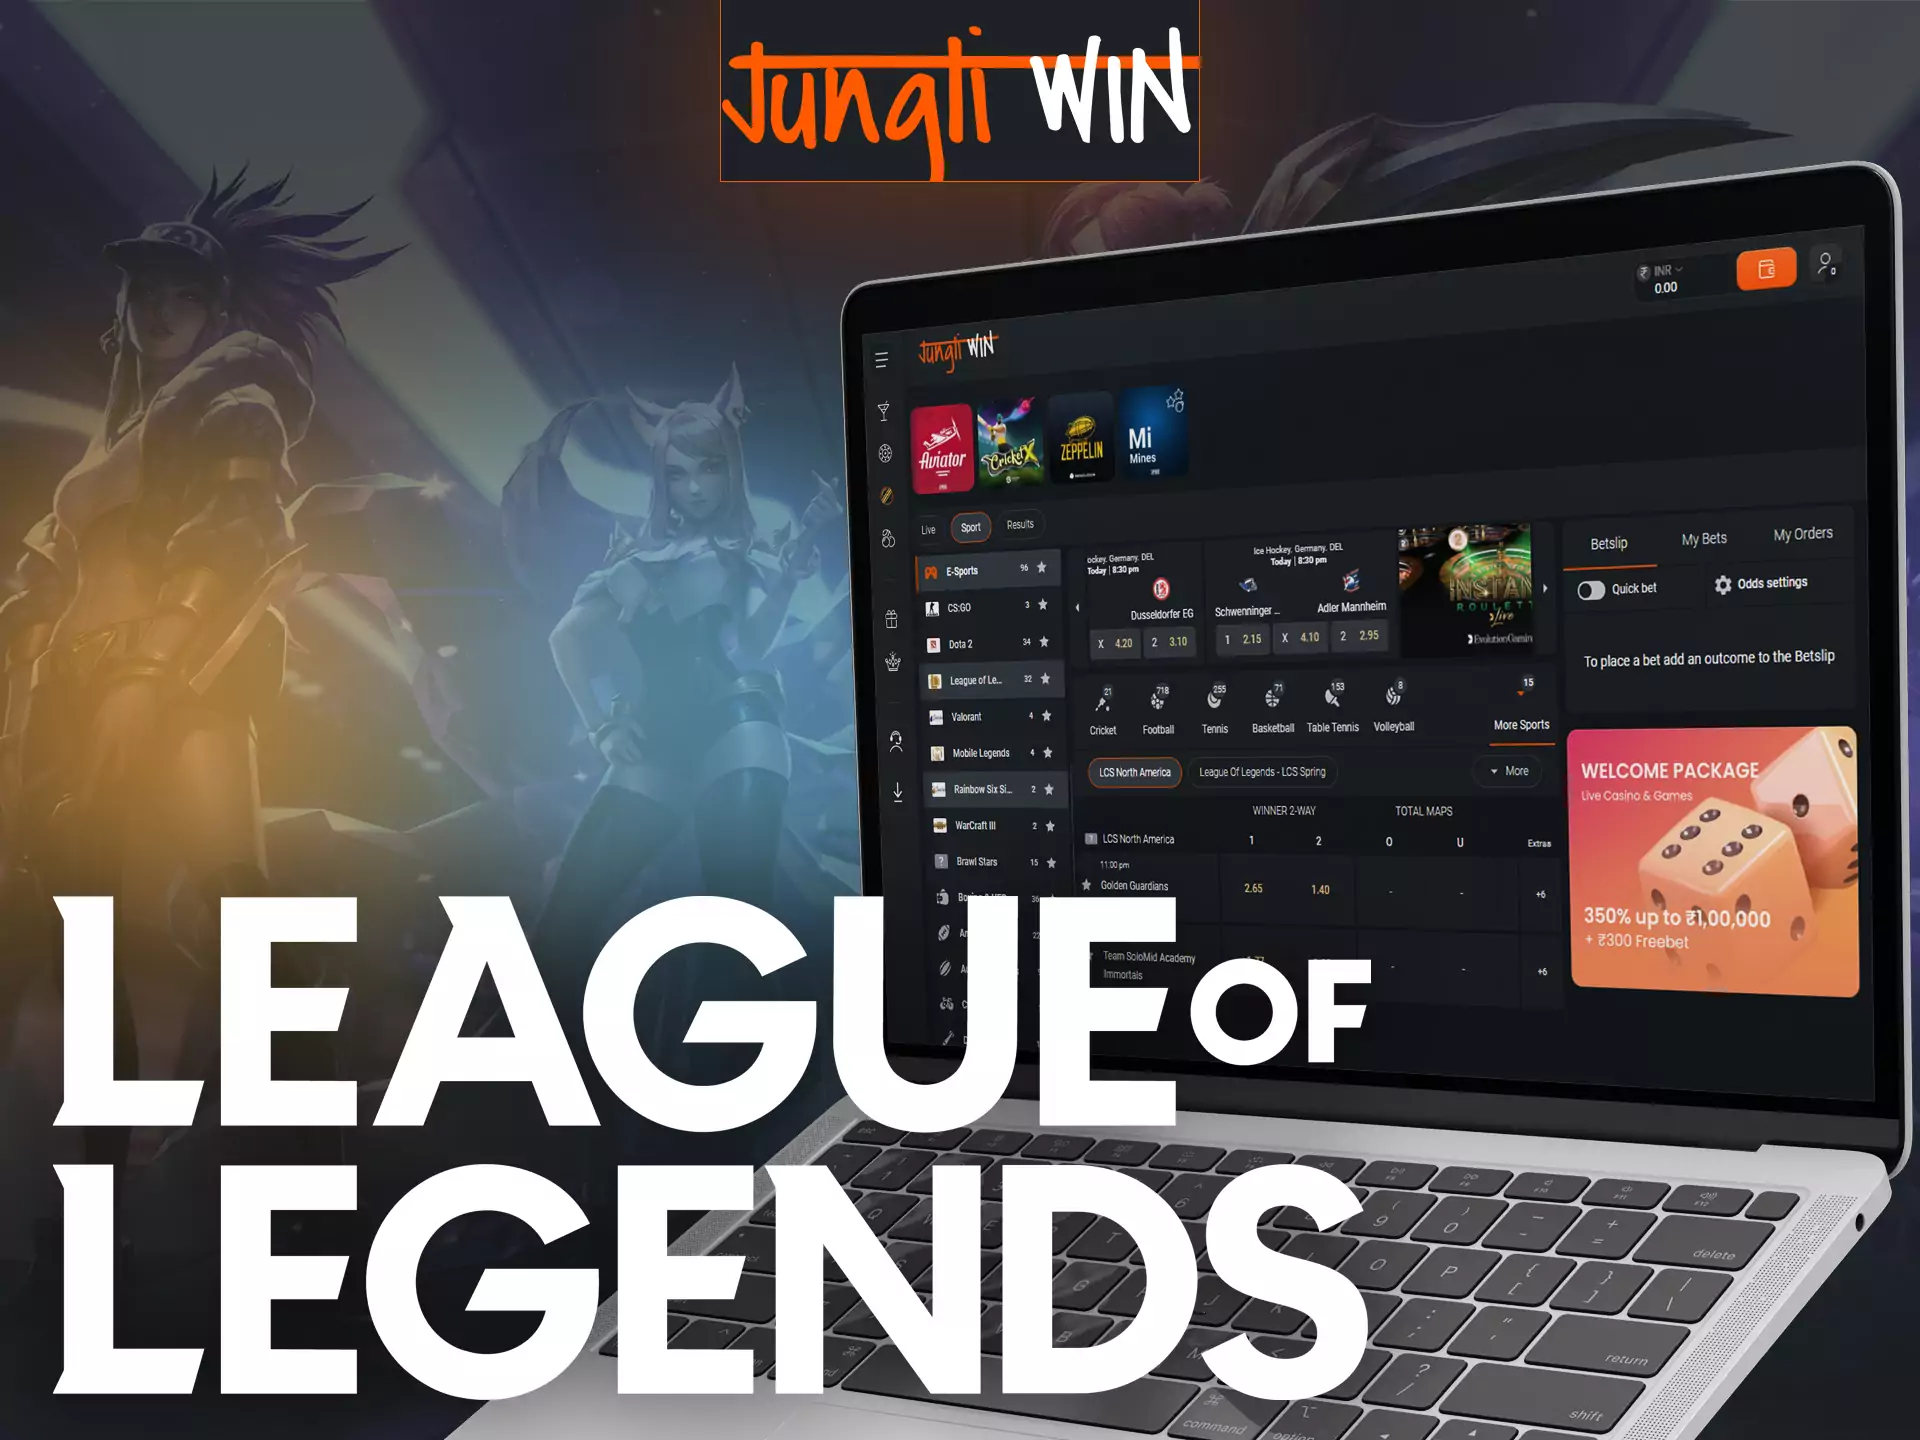 Place bets on League of Legends with Jungliwin.